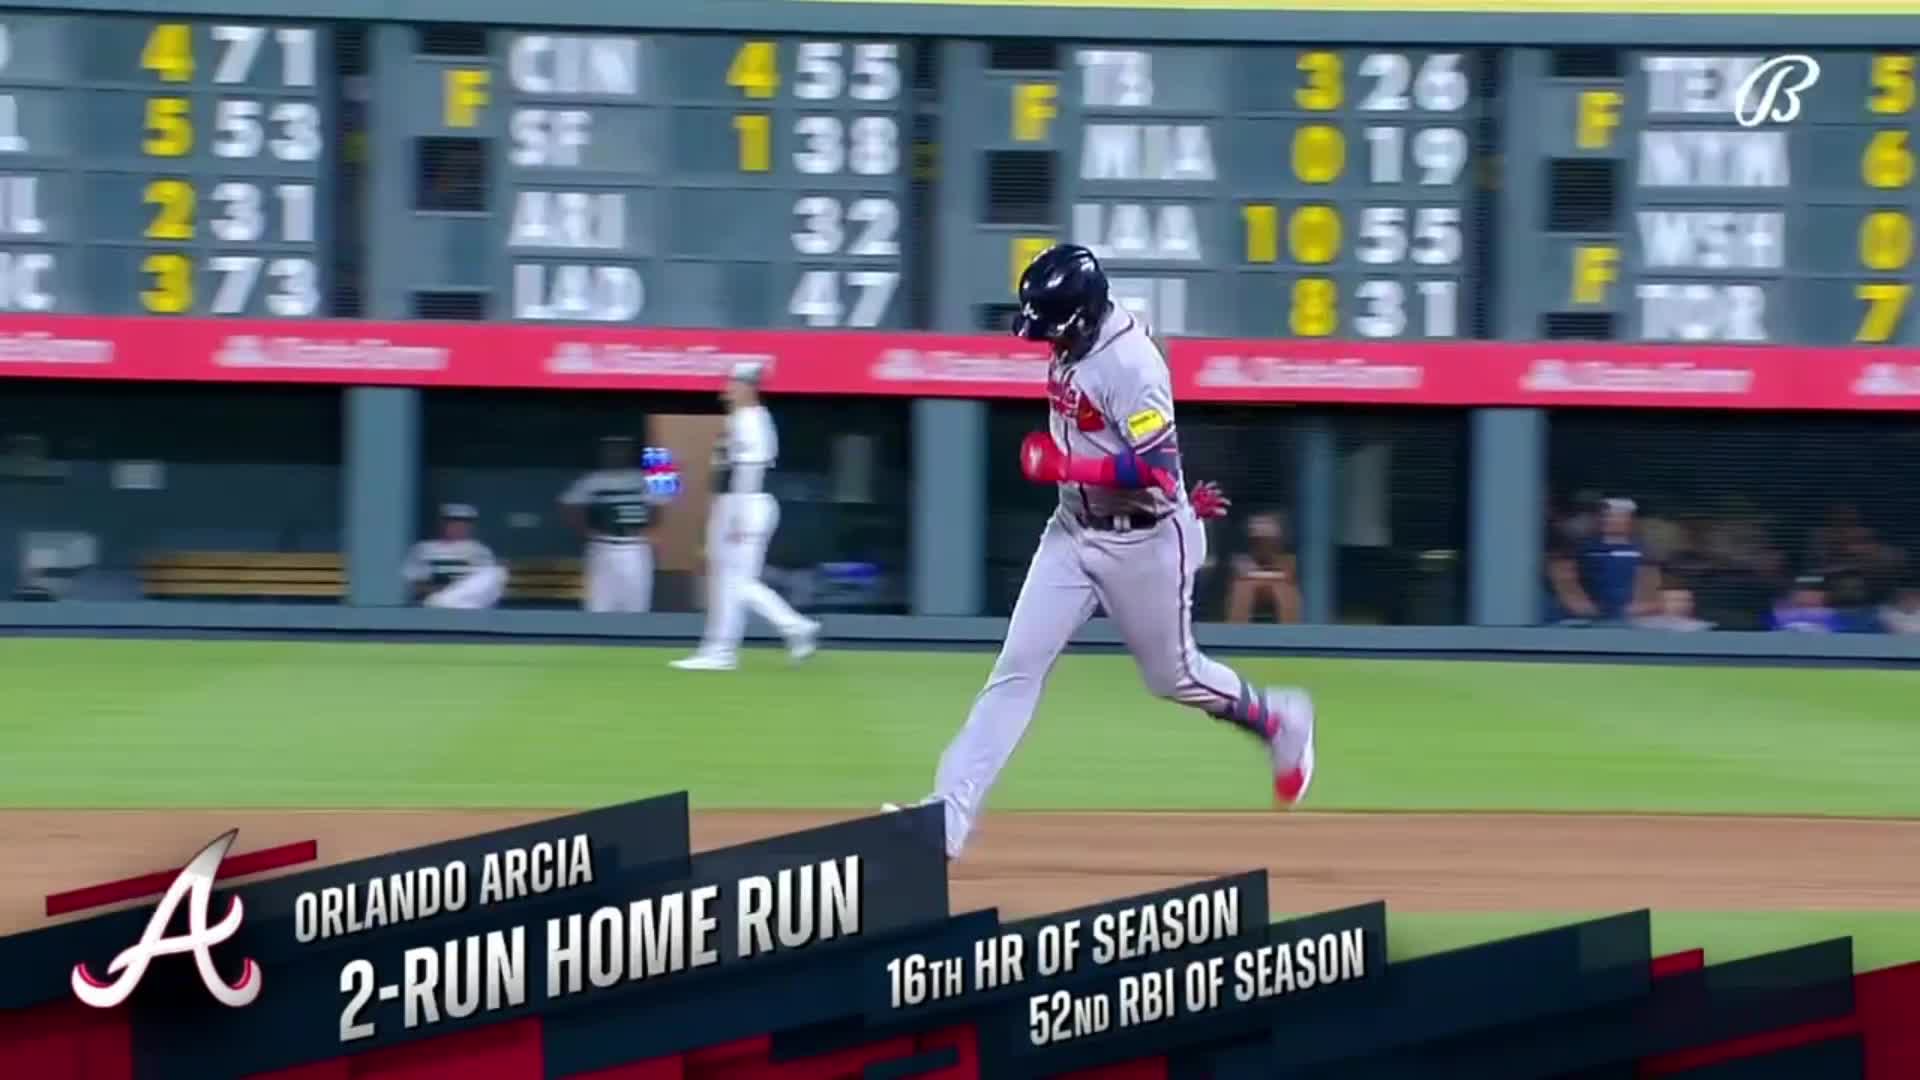 Betts sets 'remarkable' record with 105 RBIs as a leadoff hitter - ESPN